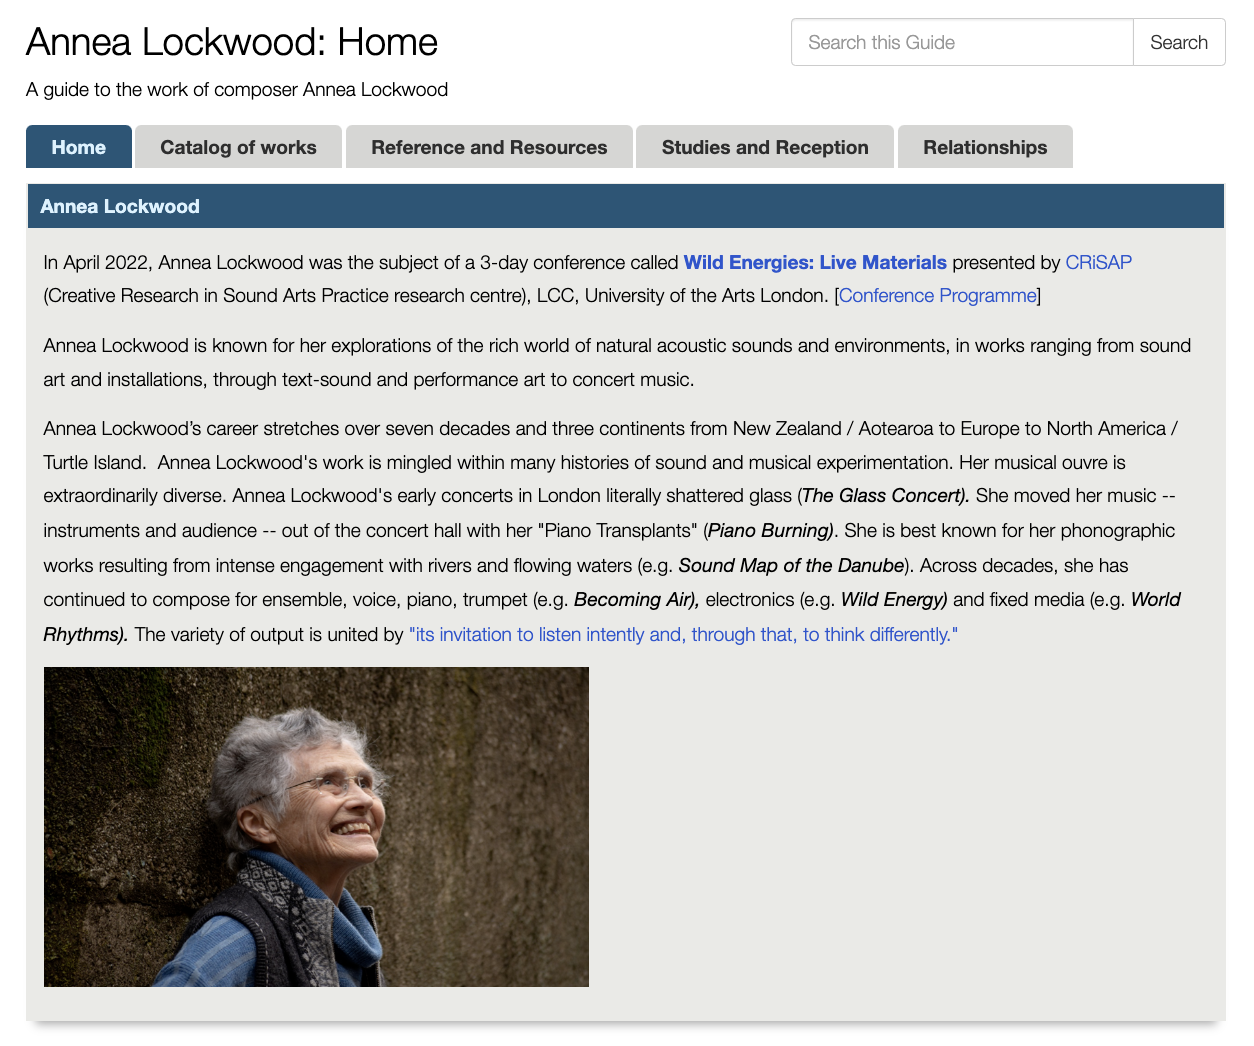 screen shot of a library guide web page - image of annea lockwood smiling, an introductory text and tabs with information, these include "catalog of works"